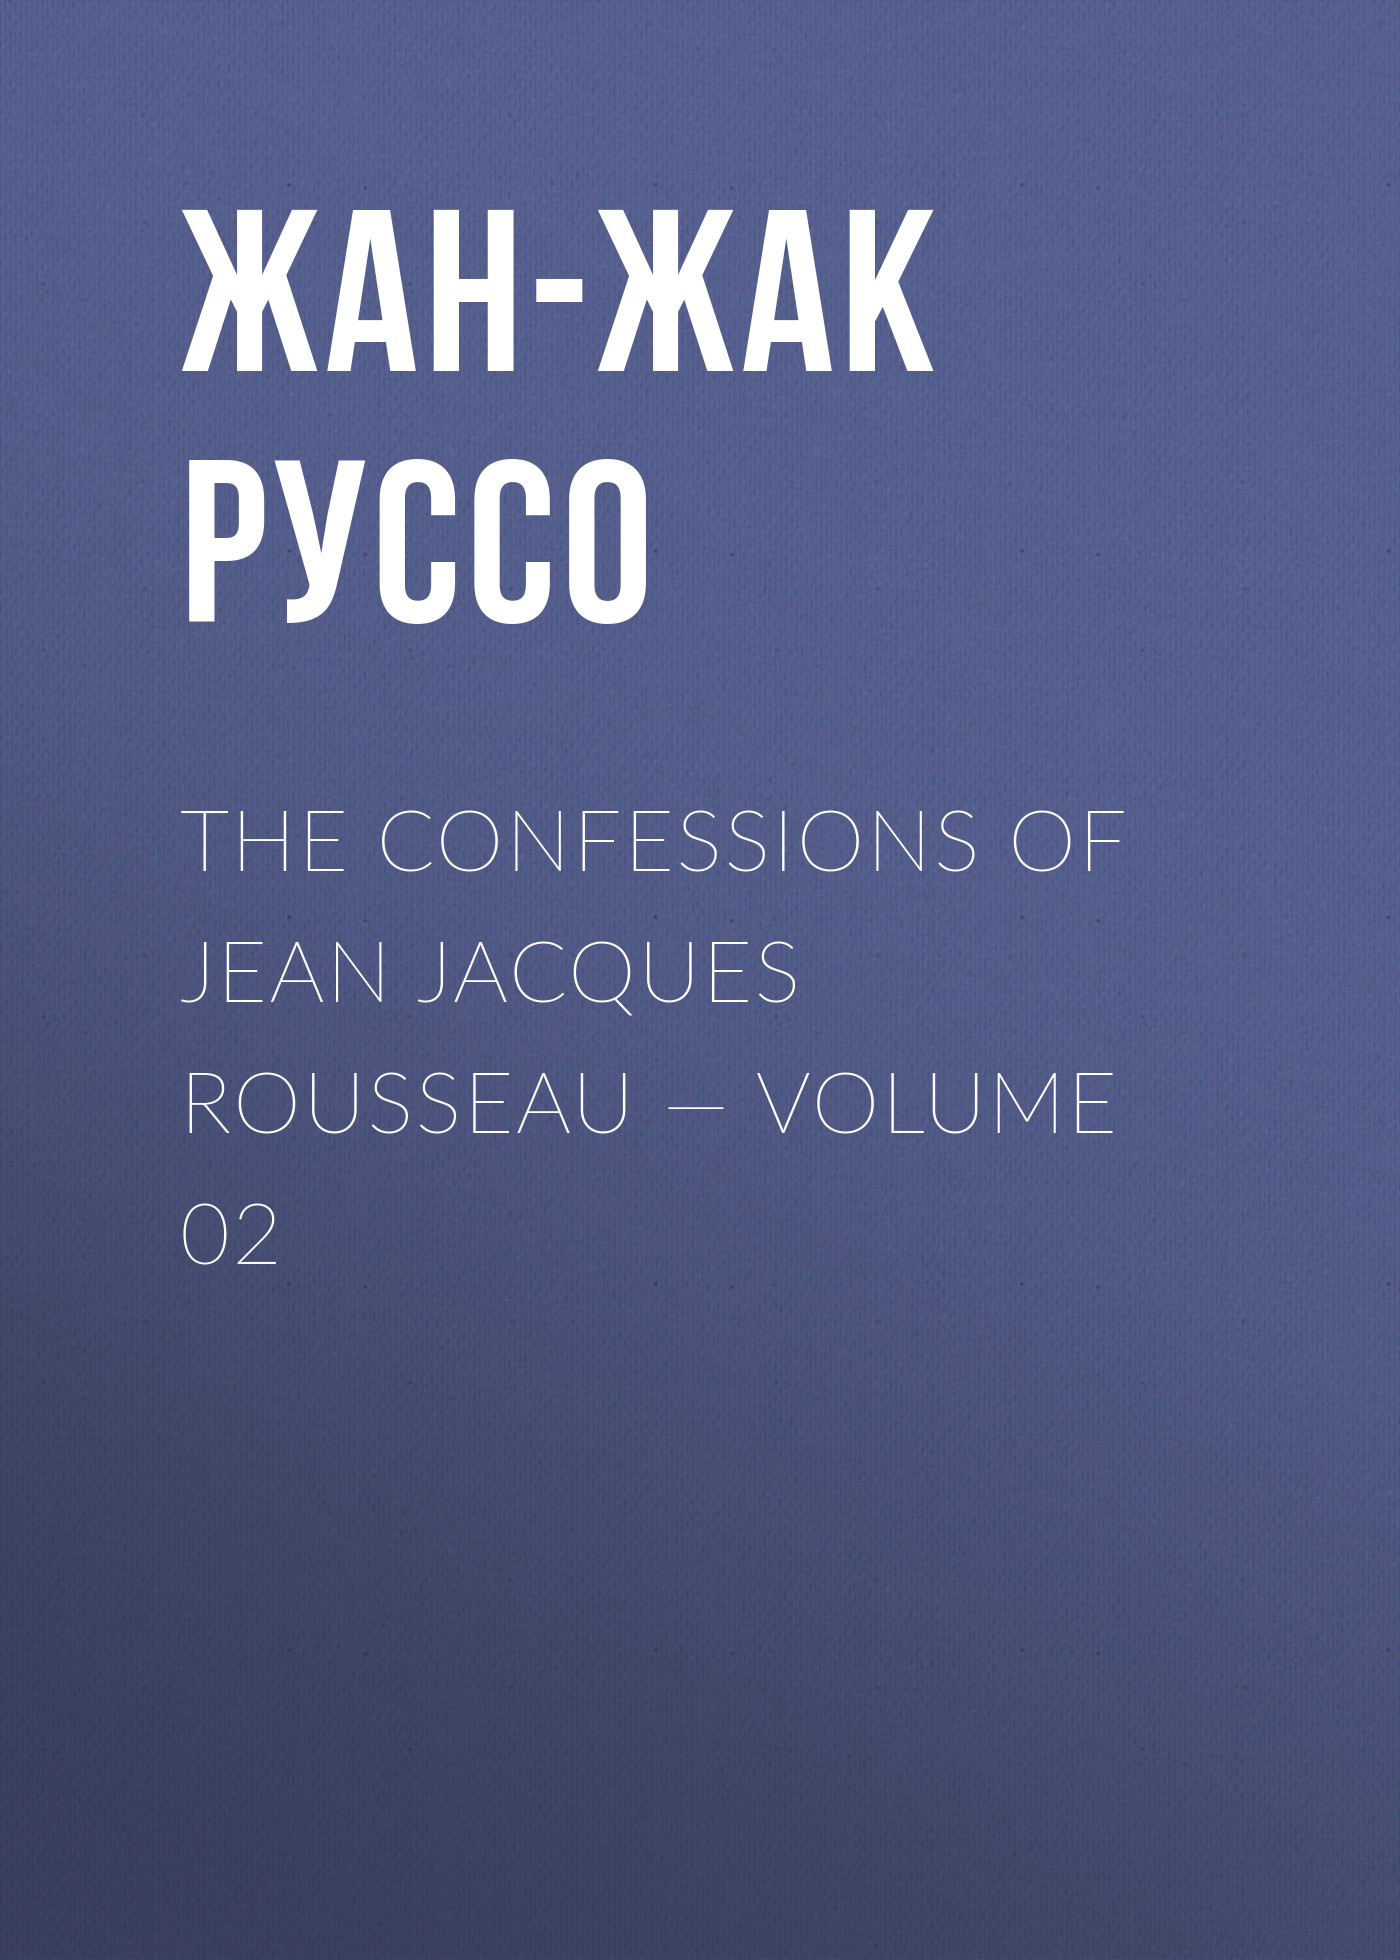 The Confessions of Jean Jacques Rousseau— Volume 02